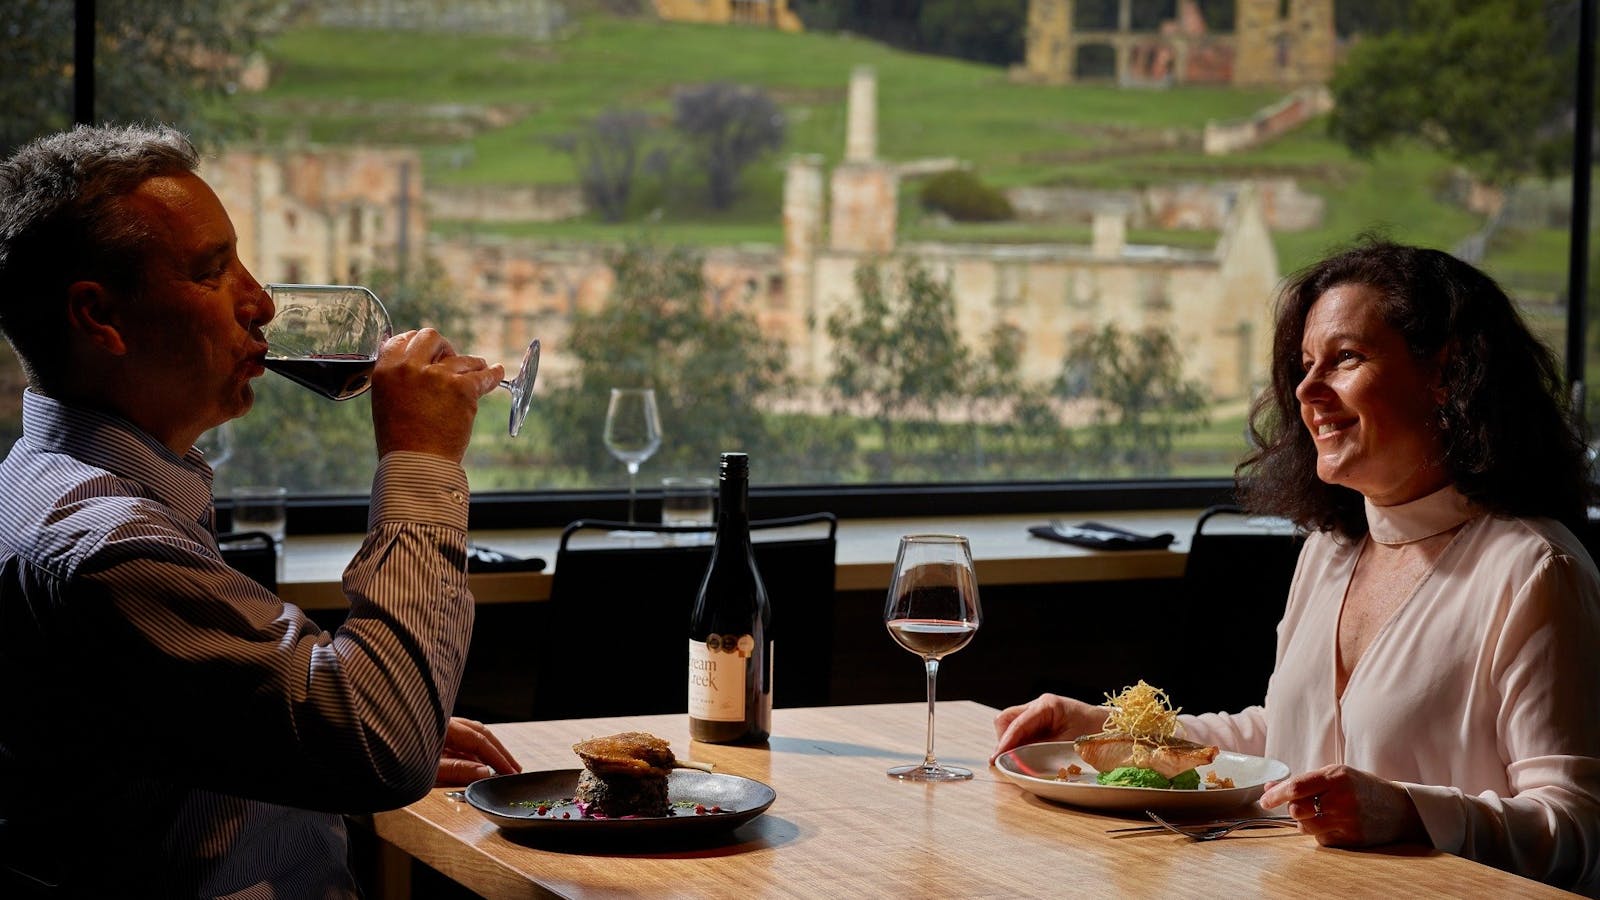 Dine in with the iconic view of the world heritage site